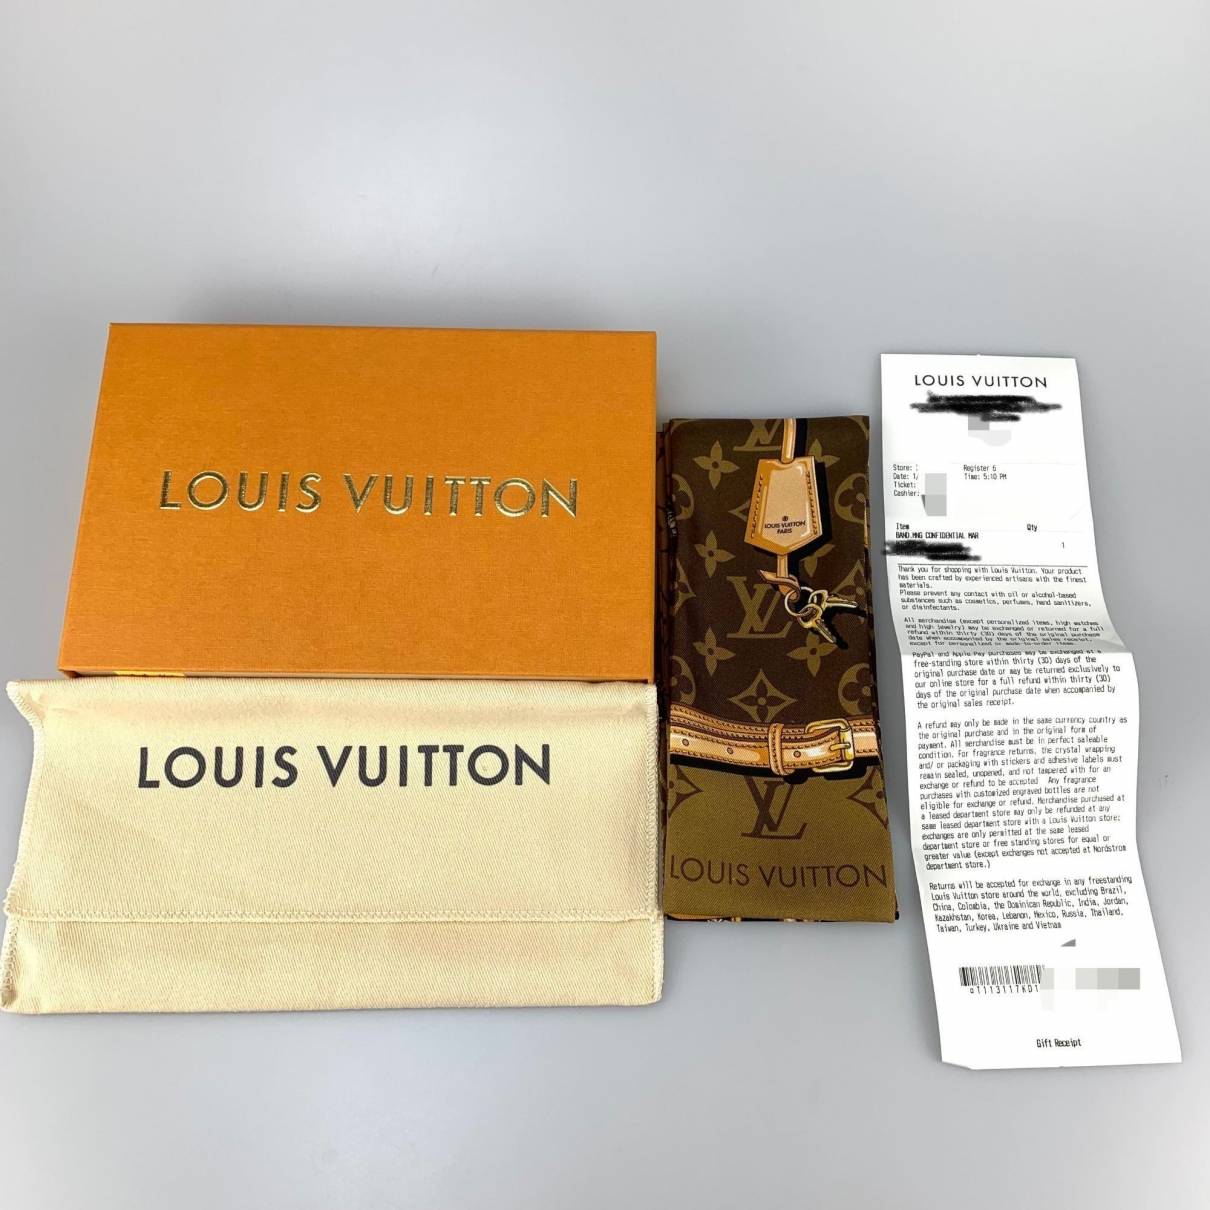 How to spot a fake Louis Vuitton scarf? Most of the scarves on